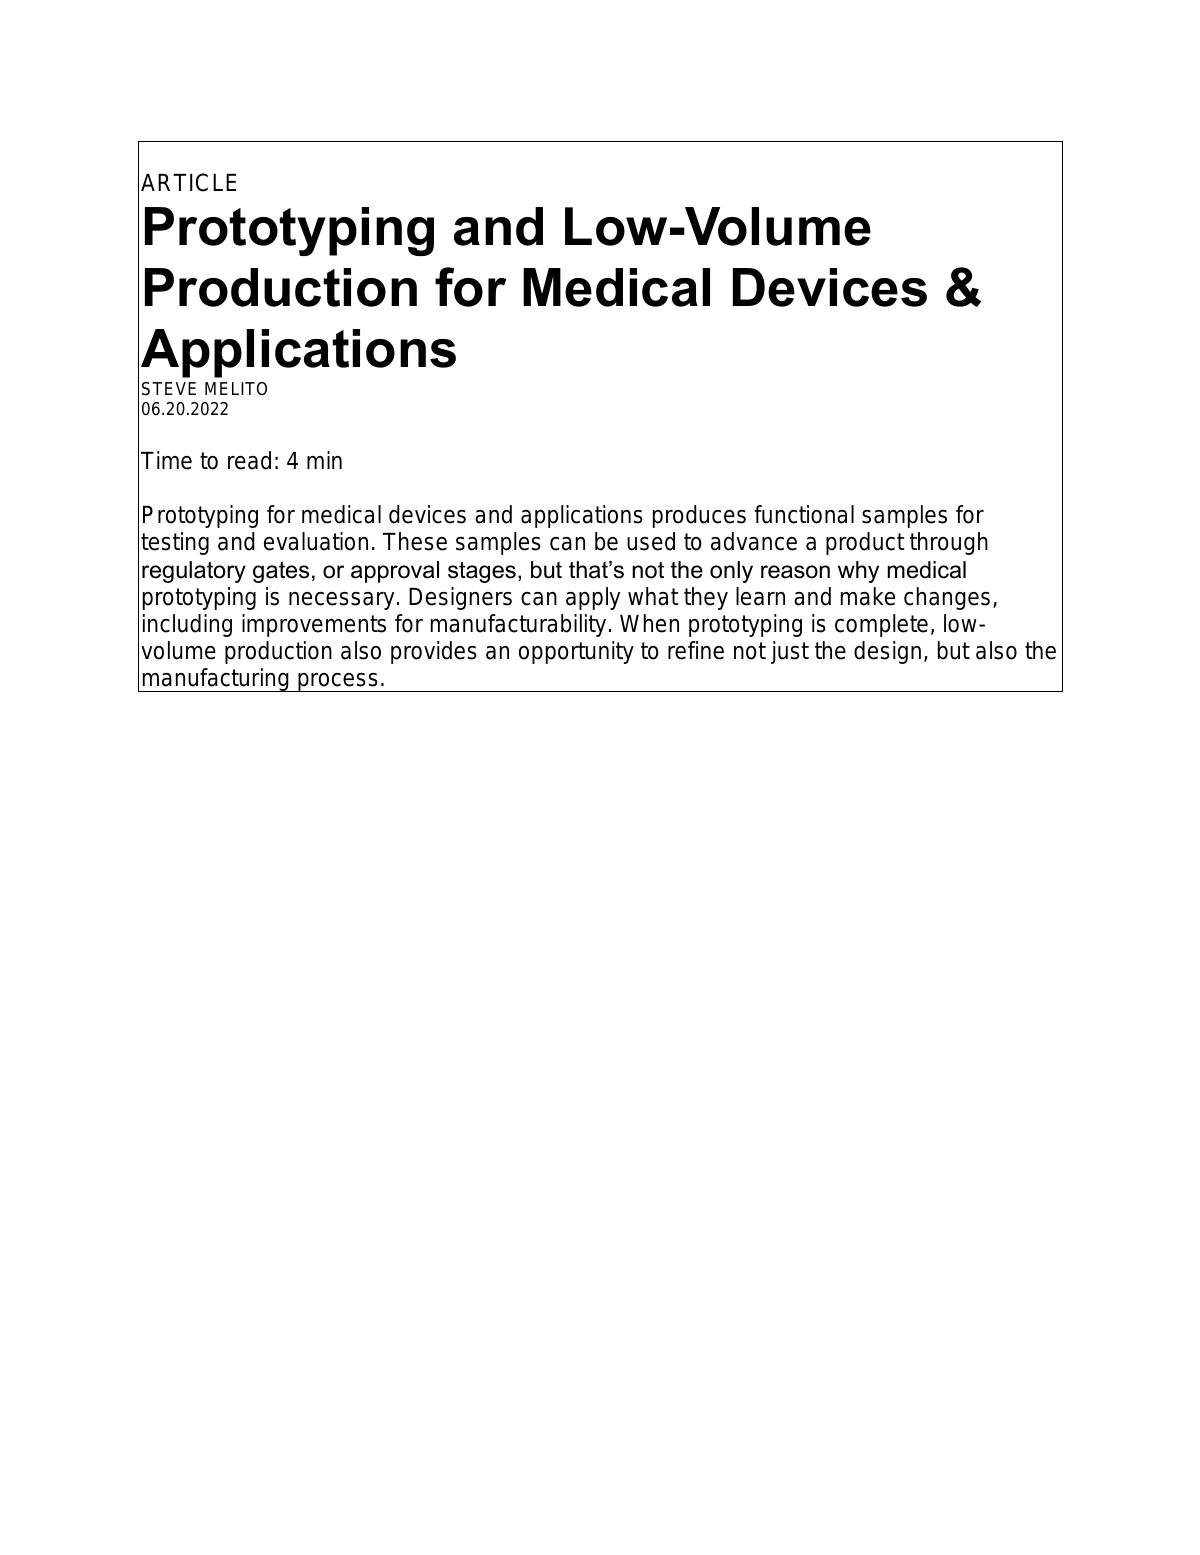 Prototyping and Low-Volume Production for Medical Devices & Applications